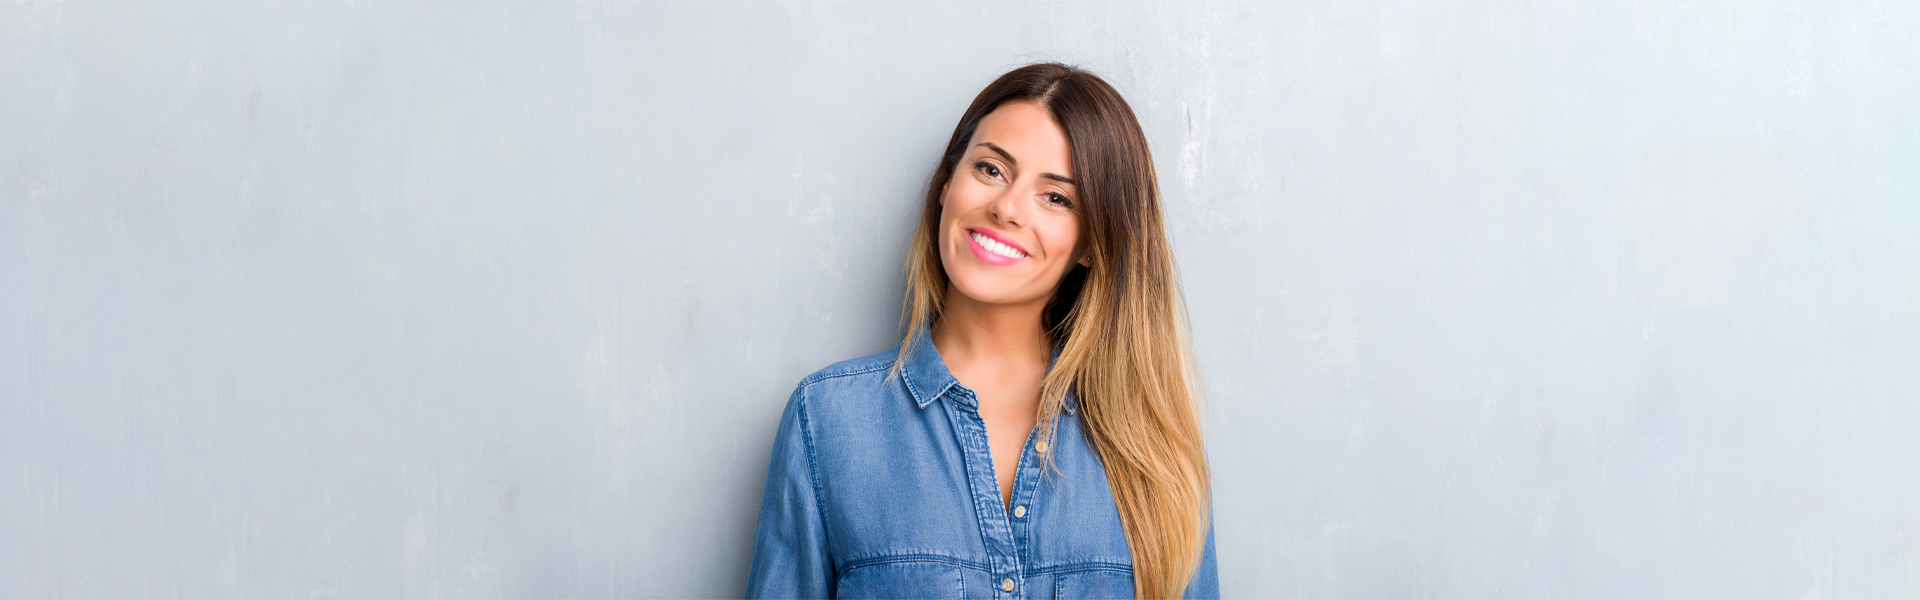 Pros and Cons to Consider Before Teeth Whitening